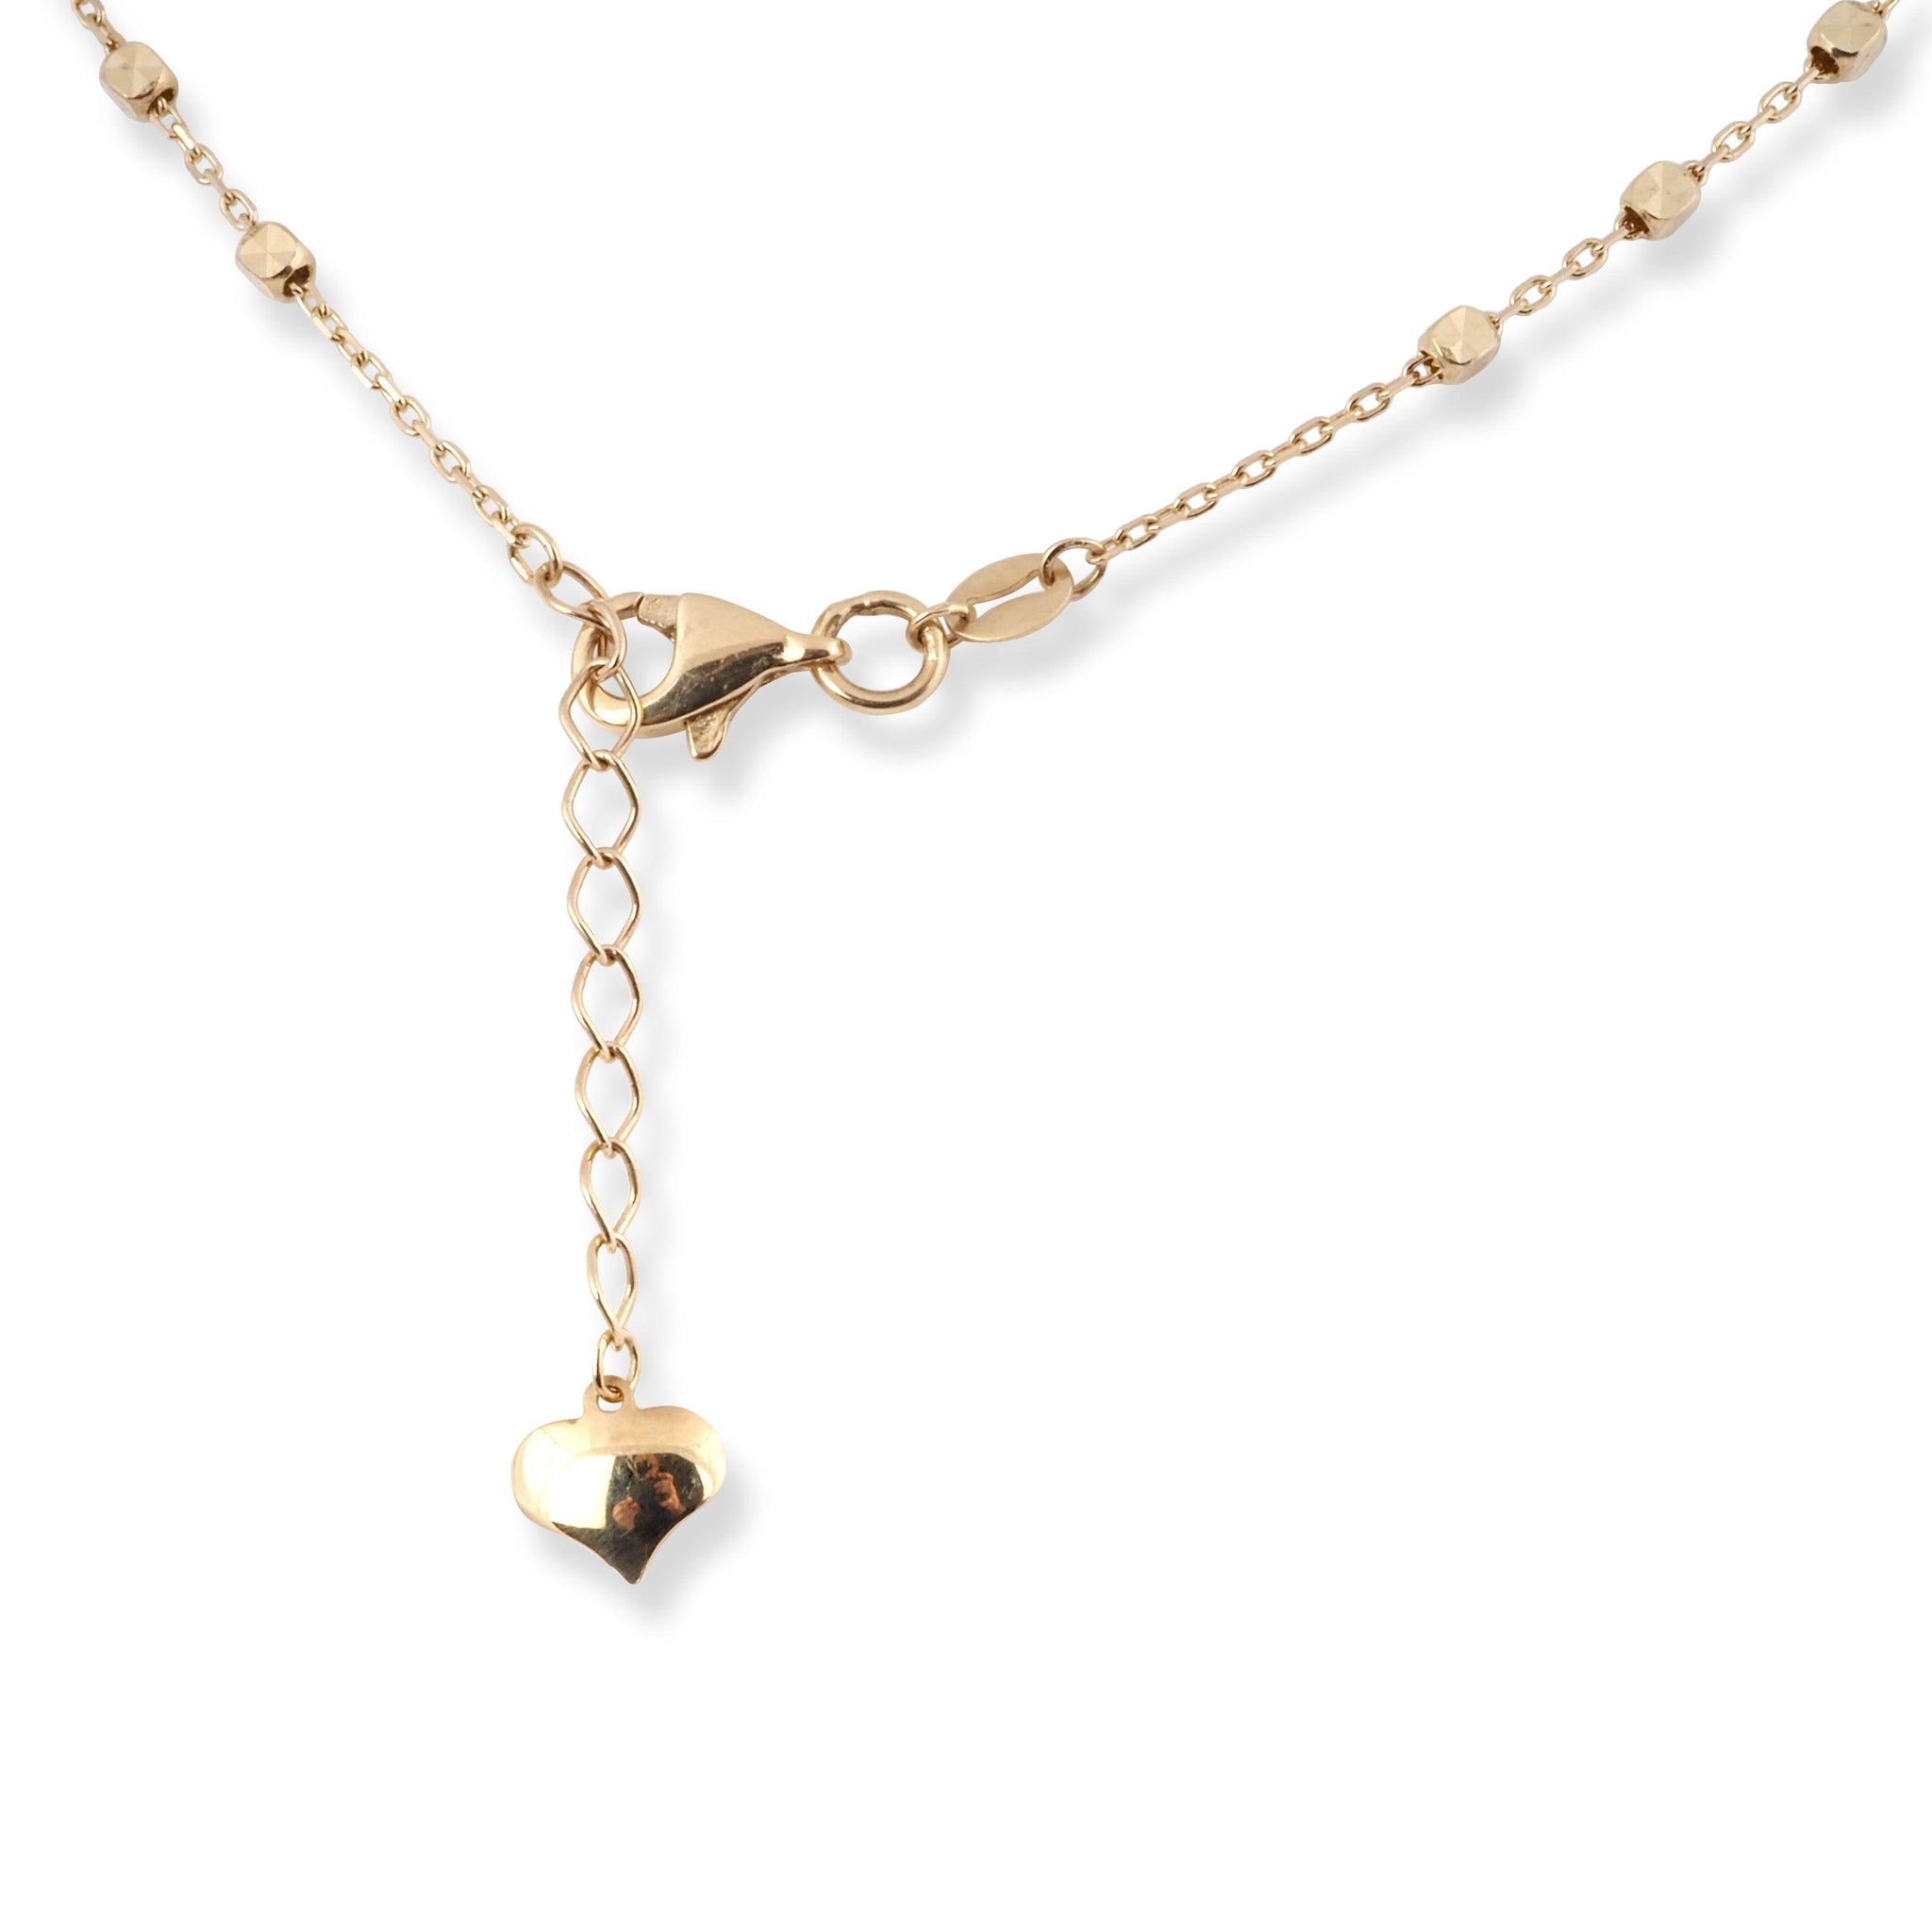 18ct Yellow Gold Necklace with Diamond Cut Beads, Lobster Clasp and Heart Charm N-7938